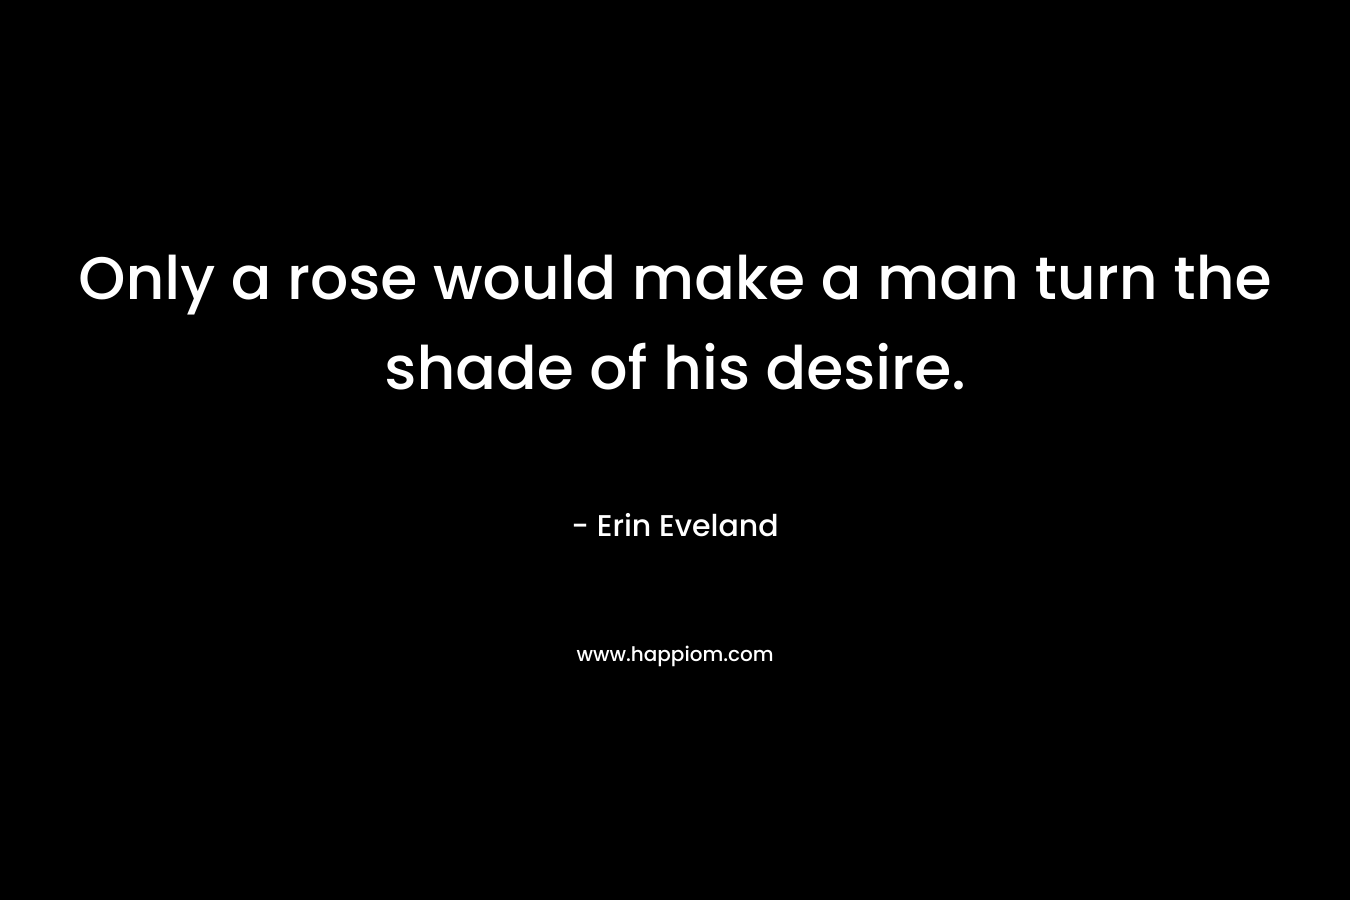 Only a rose would make a man turn the shade of his desire. – Erin Eveland